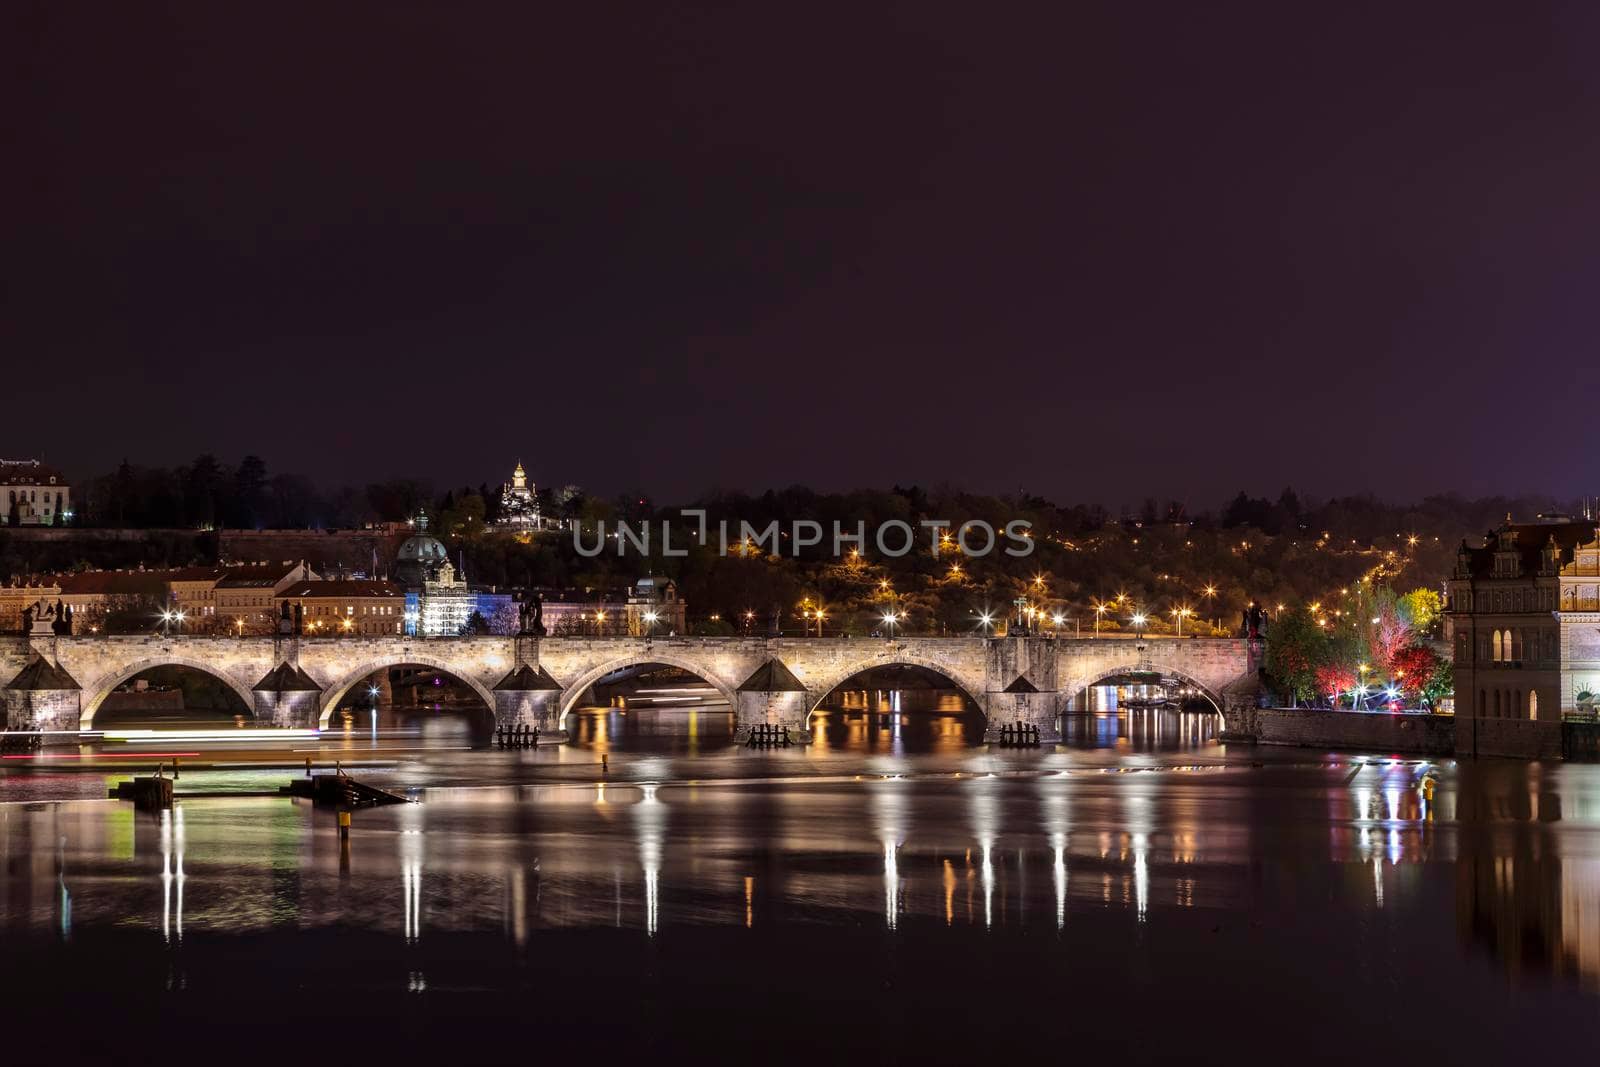 Charles Bridge in Prague in the evening with colorful lights from lanterns. In the river the reflection of the evening illuminations.